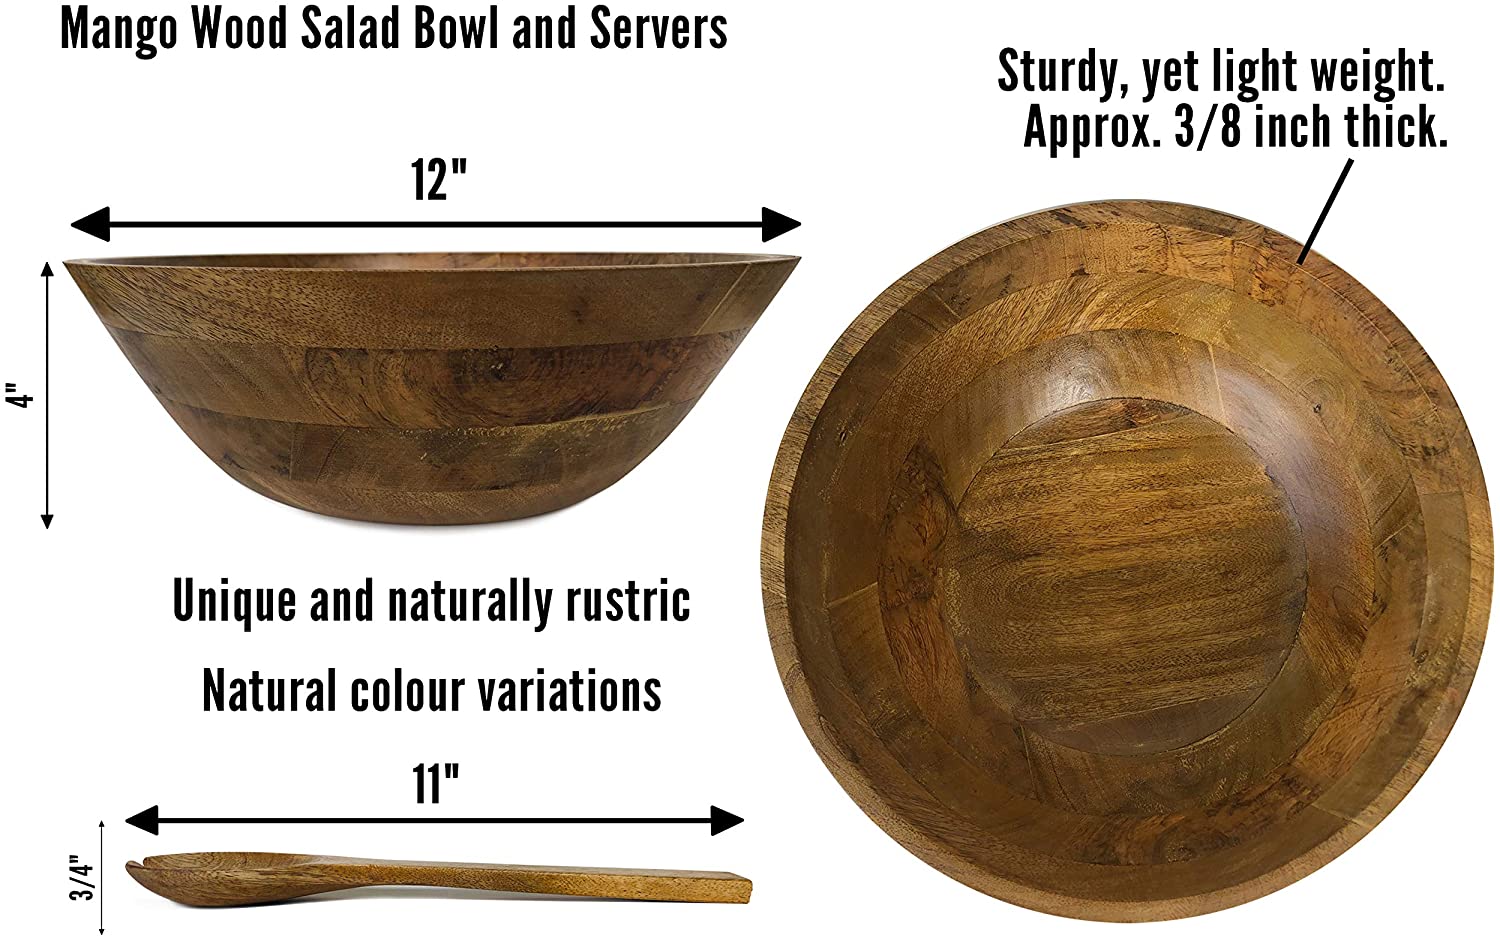 Wooden Salad Bowl. Top 10 Gift Ideas for Women Over 50 - 6